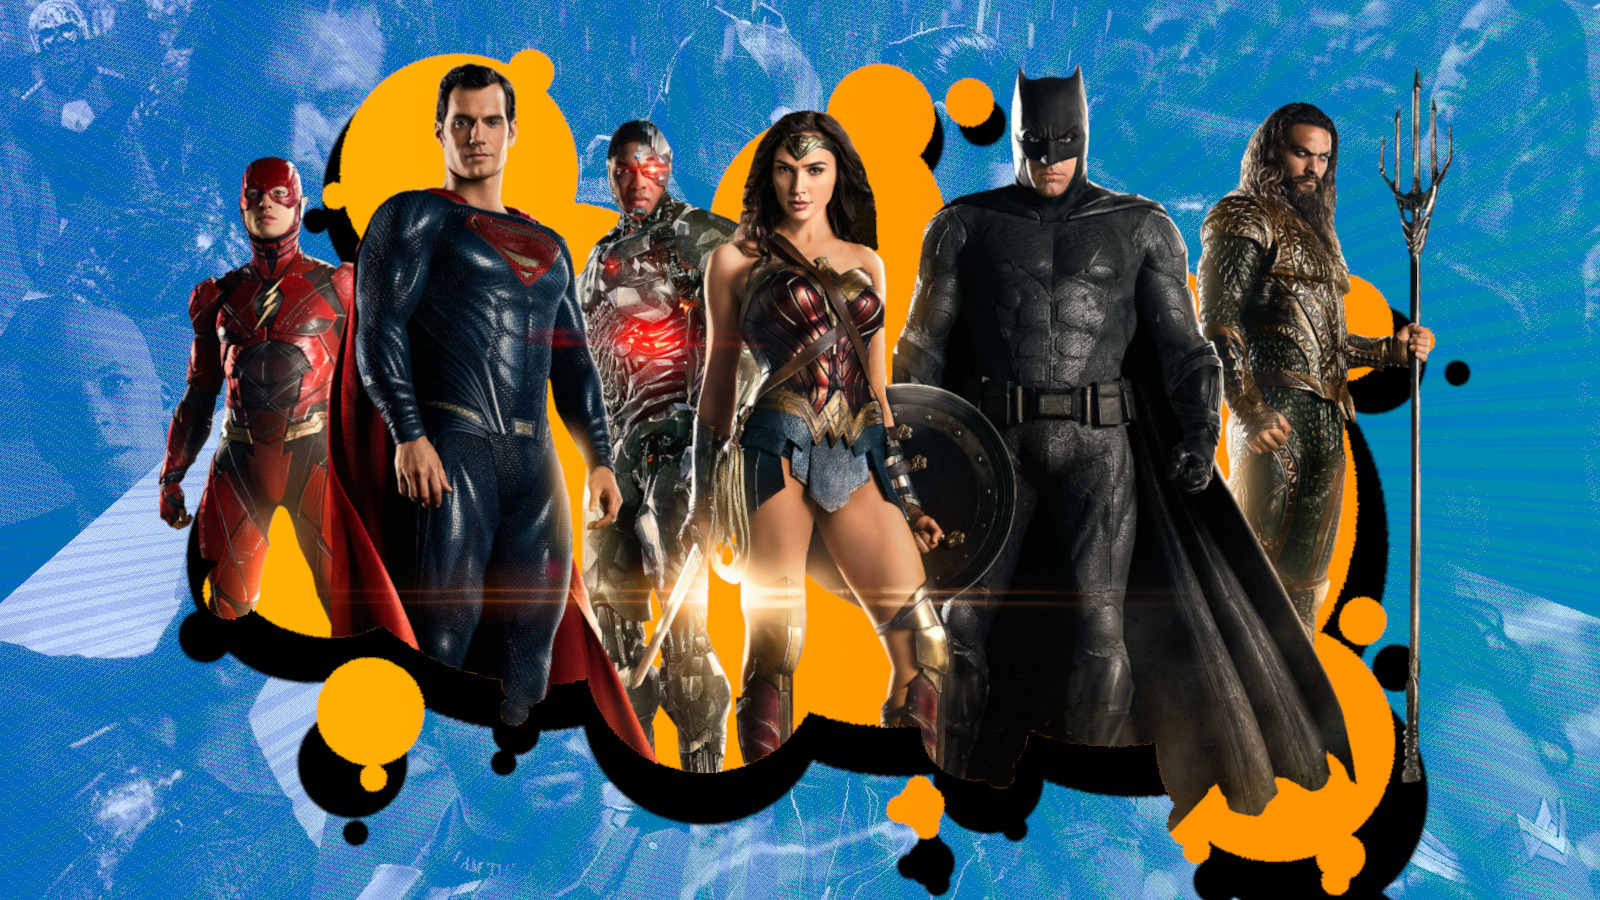 Is Zack Snyder’s Justice League the best DC film? Every DCEU movie ranked